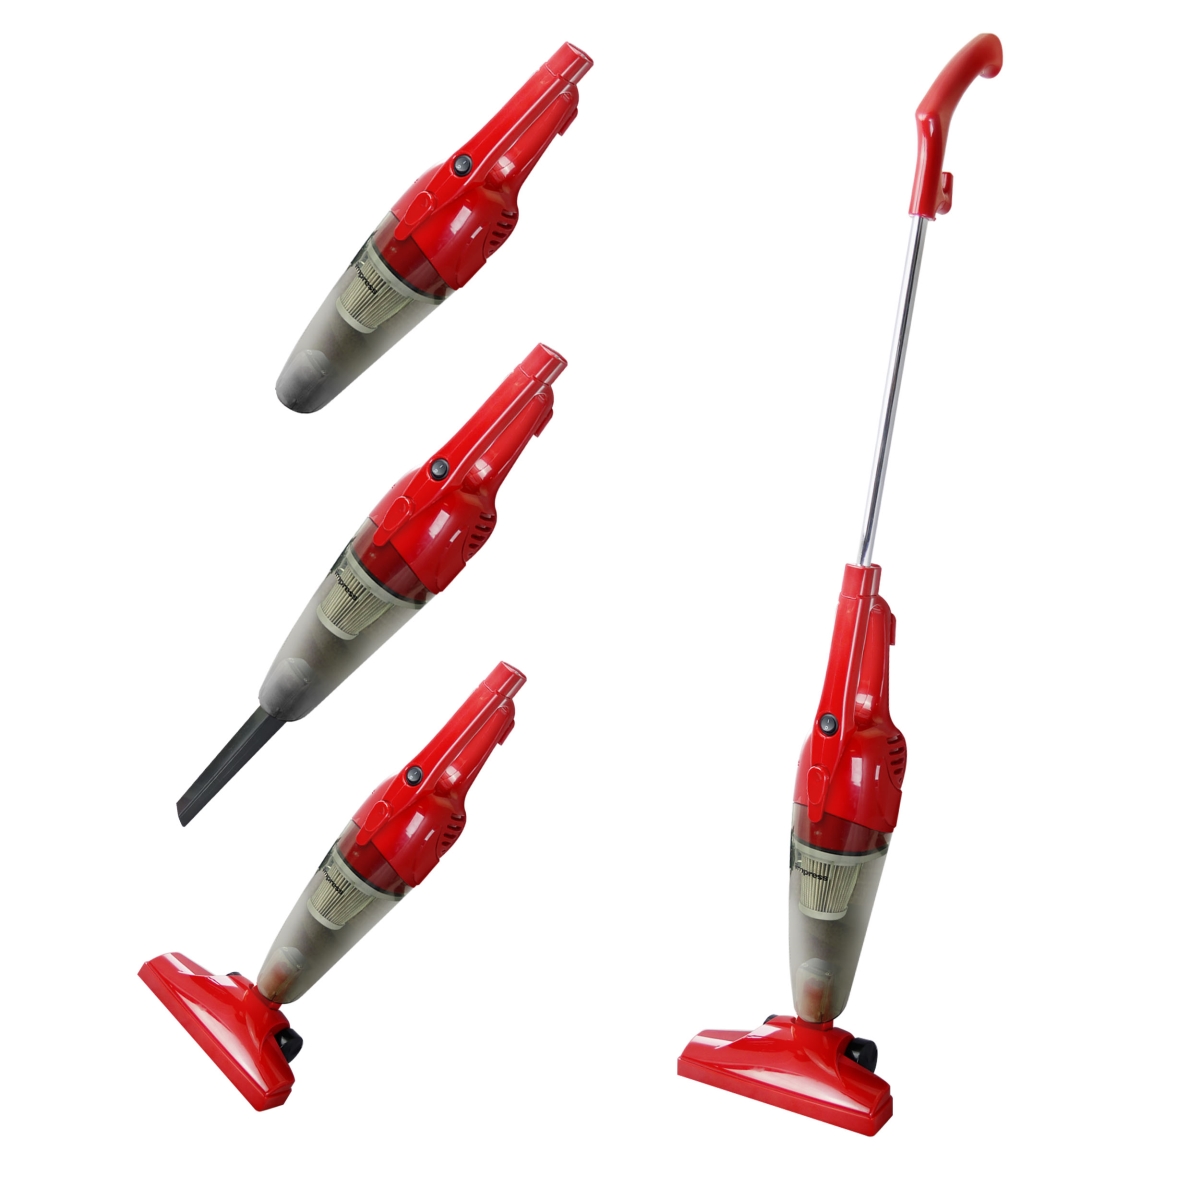 Im-1007r 2-in-1 Govac Upright-hand Held Vacuum Cleaner - Red